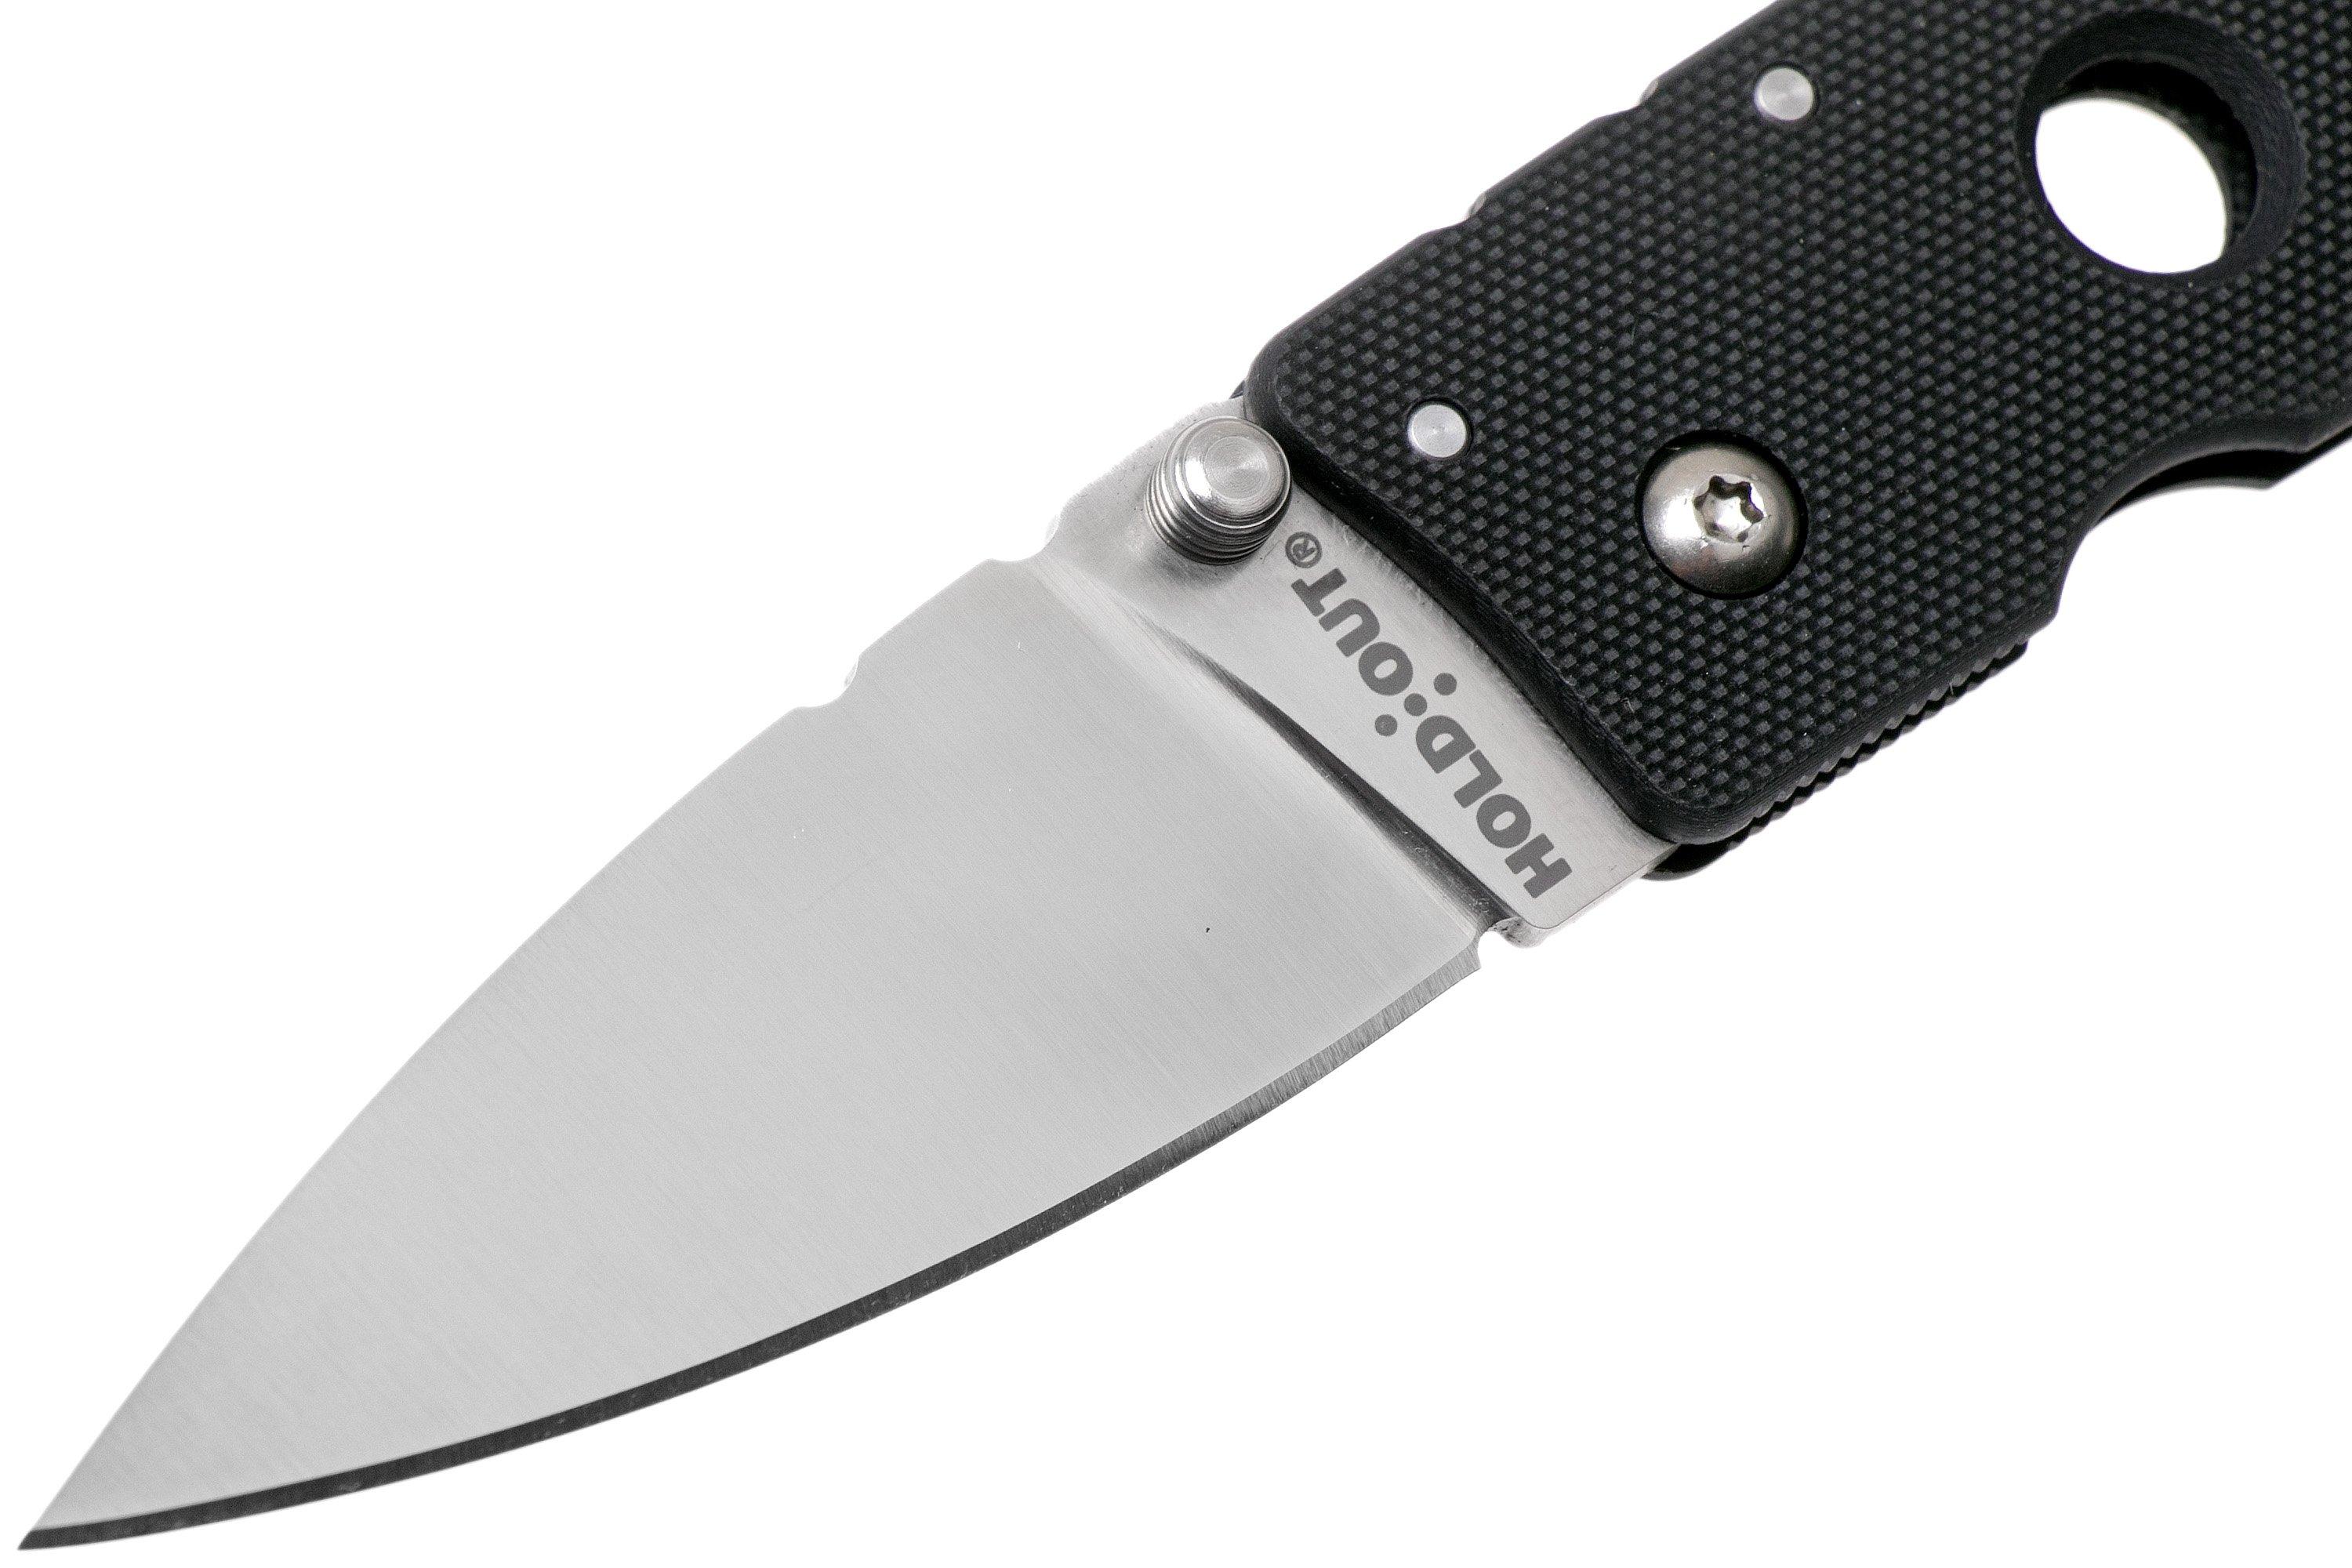 cold-steel-hold-out-3-11g3-cpm-s35vn-pocket-knife-advantageously